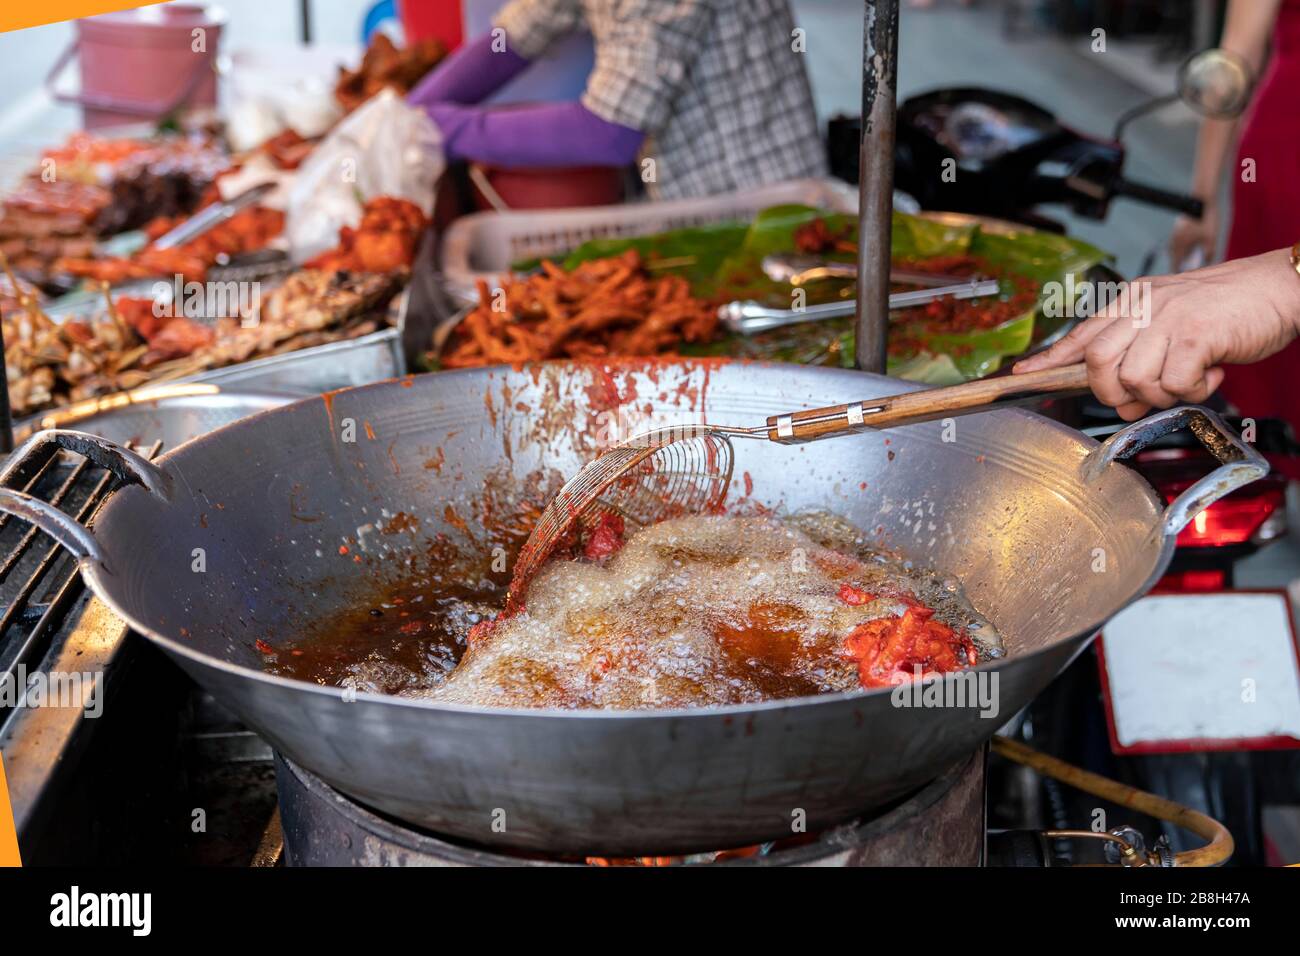 Street food in Thailand. deep-fried chicken using a large frying pan with boiling oil. Food from carts, travel and local flavor. Stock Photo